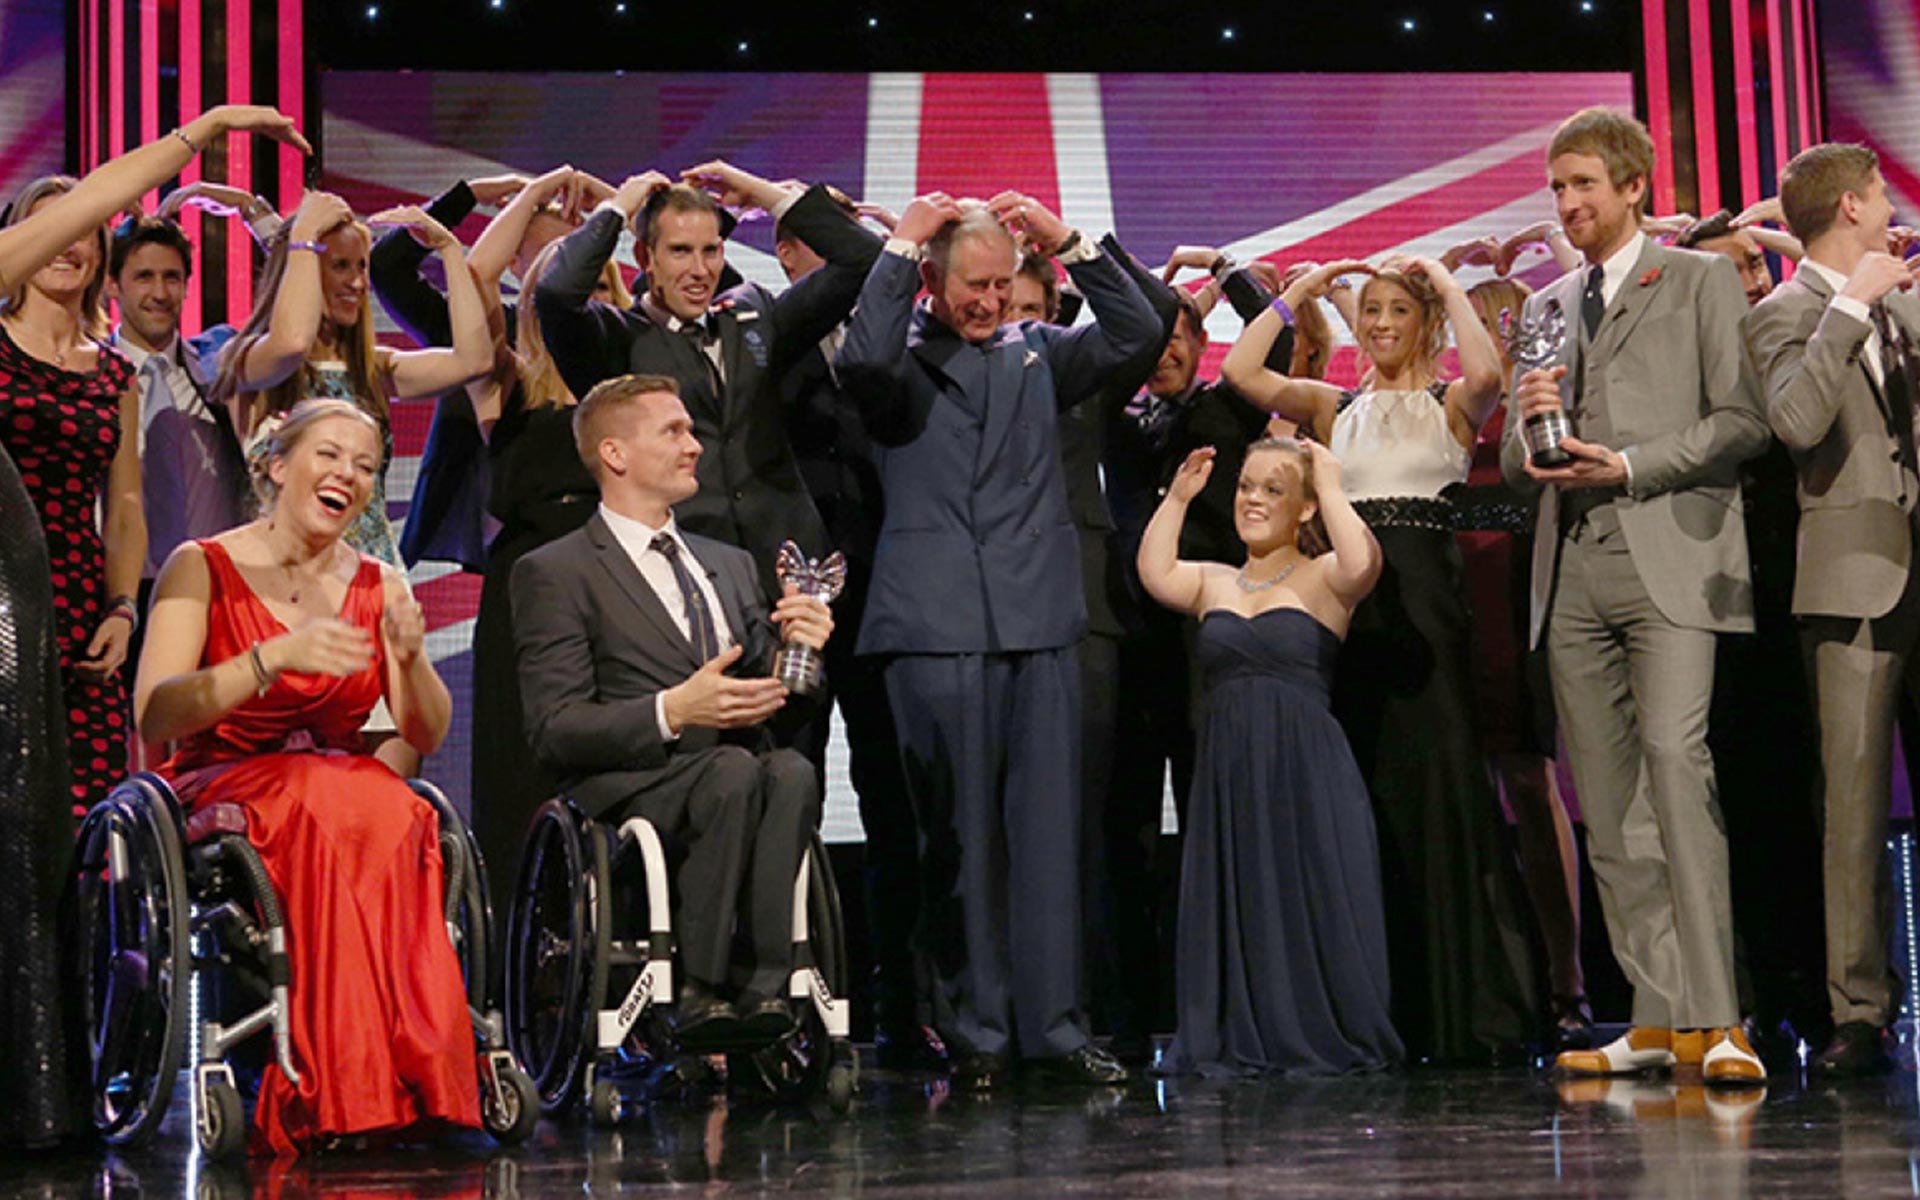 Special Recognition - Team GB and ParalympicsGB